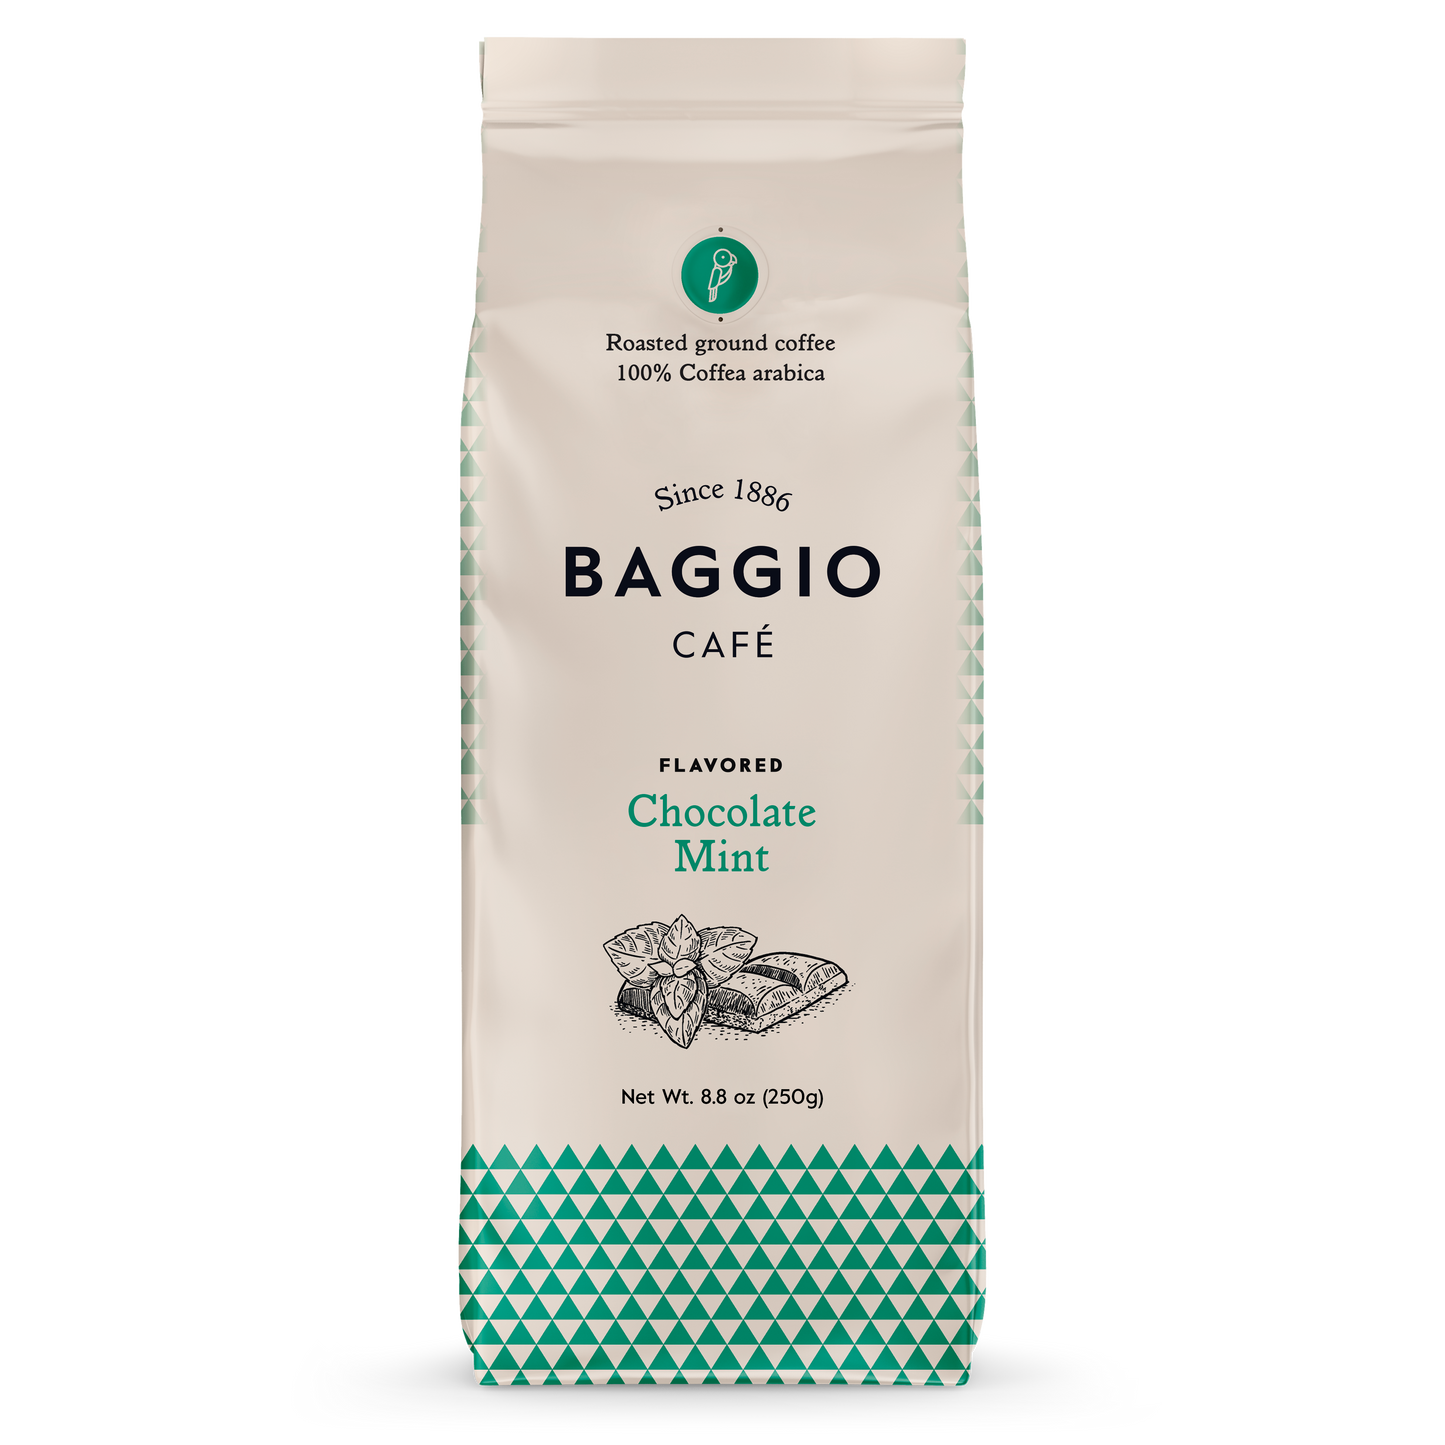 chocolate mint flavored gourmet coffee baggio cafe